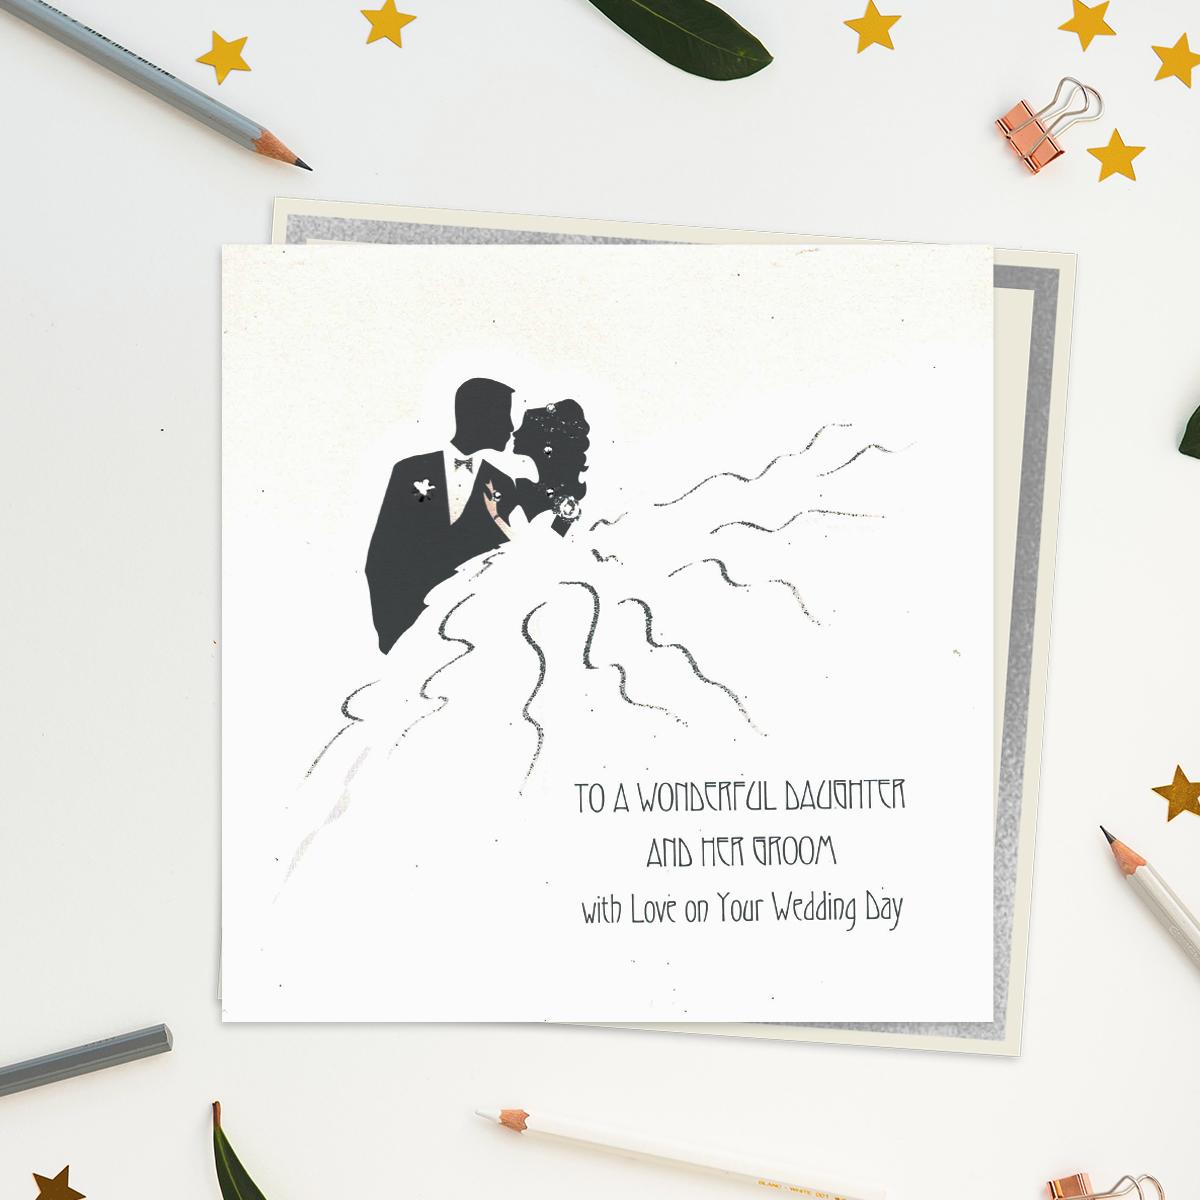 Stunning, Luxury, Handcrafted Wedding Day Card For A Wonderful Daughter And Her Groom. Showing A Couple In Silhouette With Added Gem Enhancement And Biodegradable Glitter Accents. Blank inside For Own Message. Warm White Envelope With Silver Border.